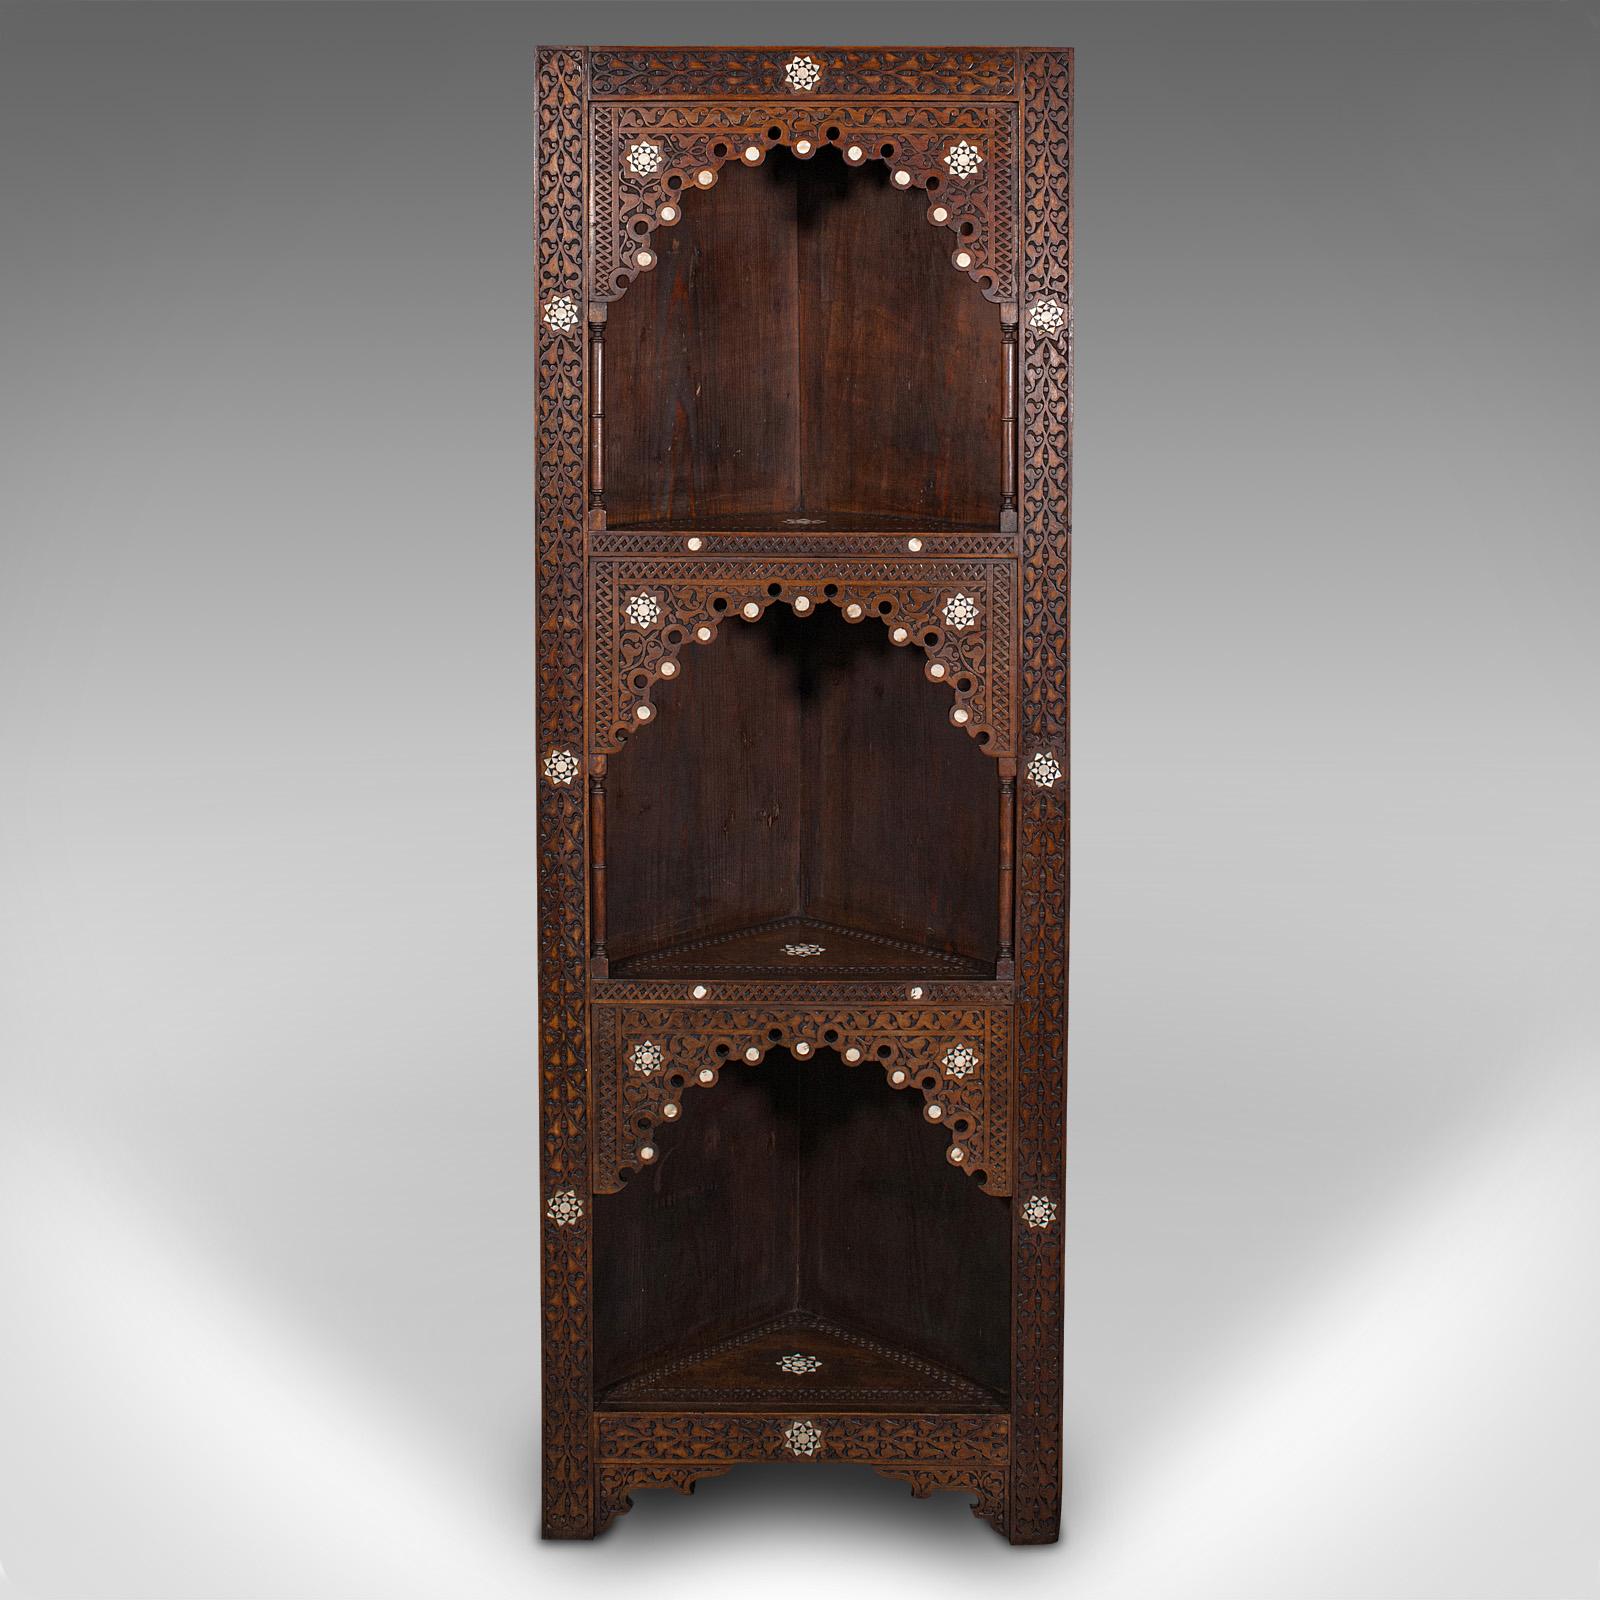 This is an antique corner display stand. A Middle Eastern, mahogany and pine open shelf cabinet in Moorish taste, dating to the late Victorian period, circa 1900.

Wonderfully ornate in the usual Moorish way, with a trio of shelves
Displays a